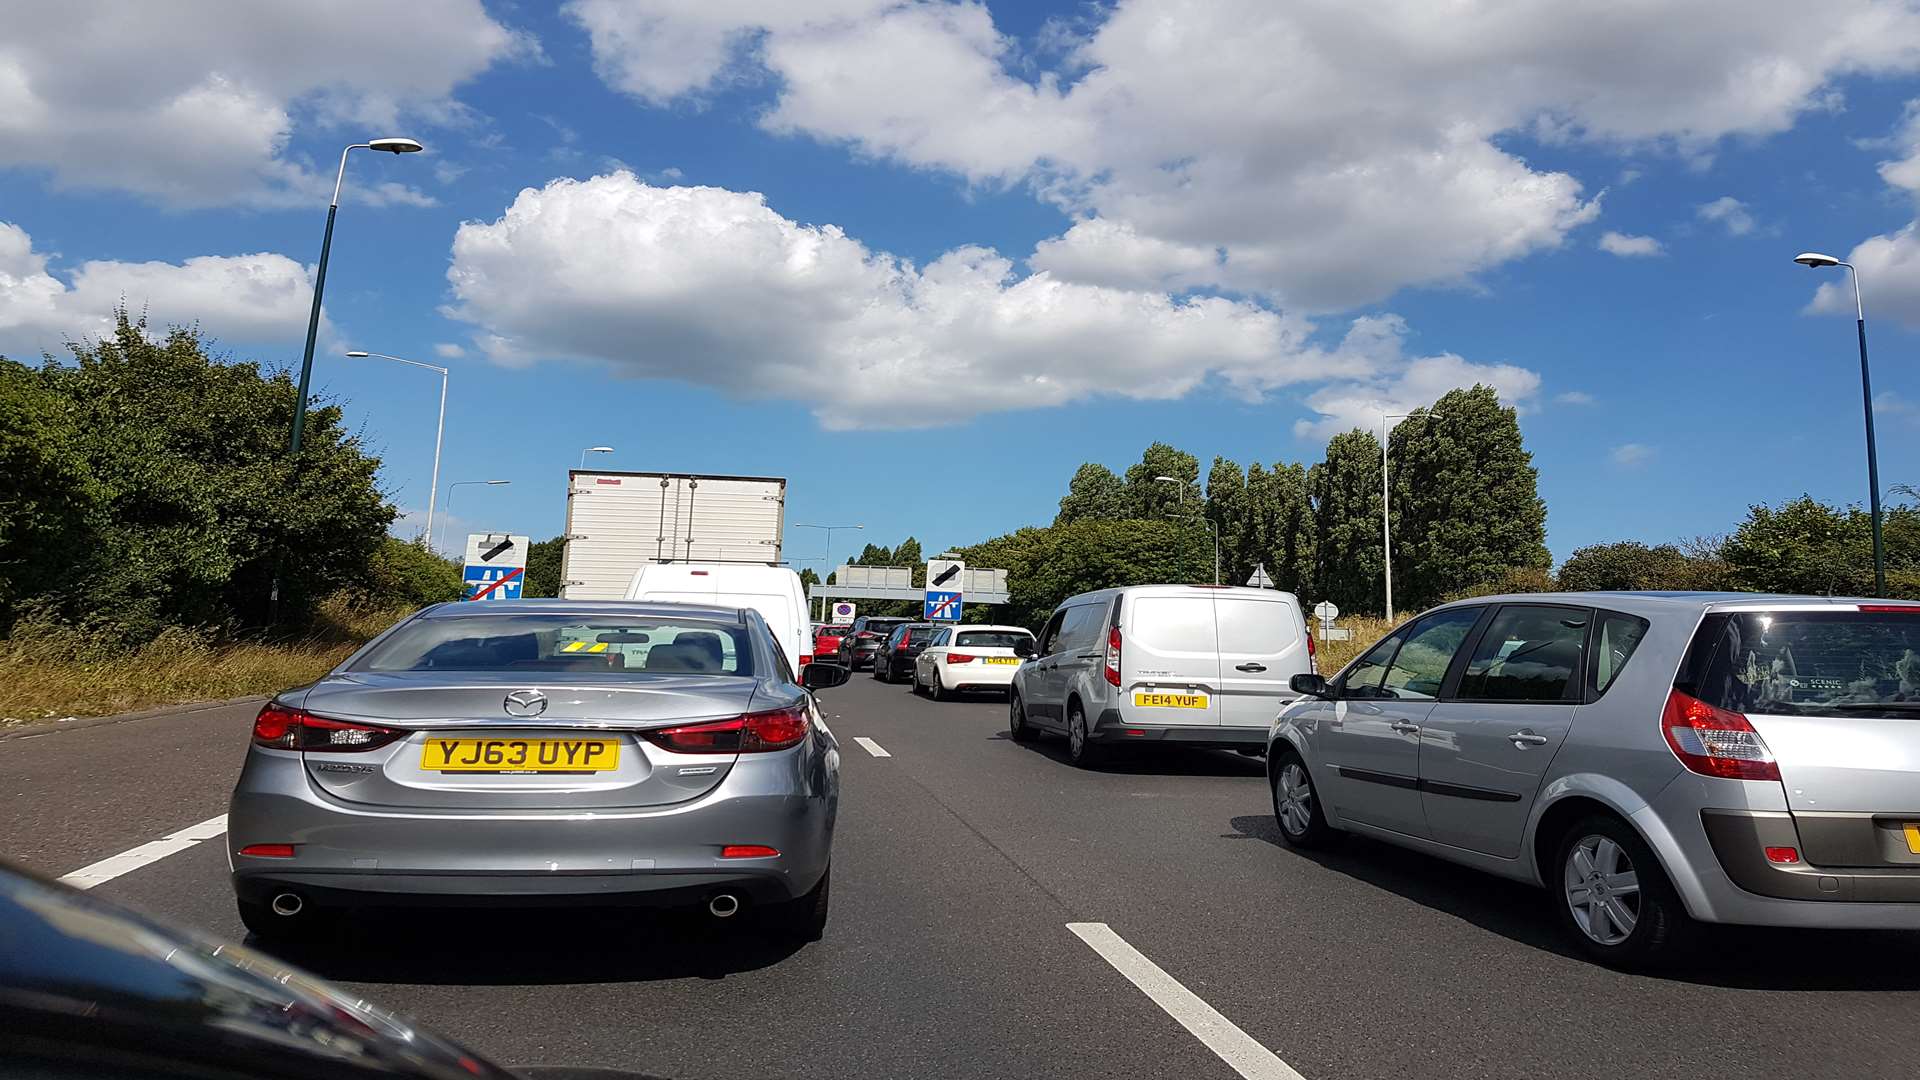 Delays are stretching back onto the M2